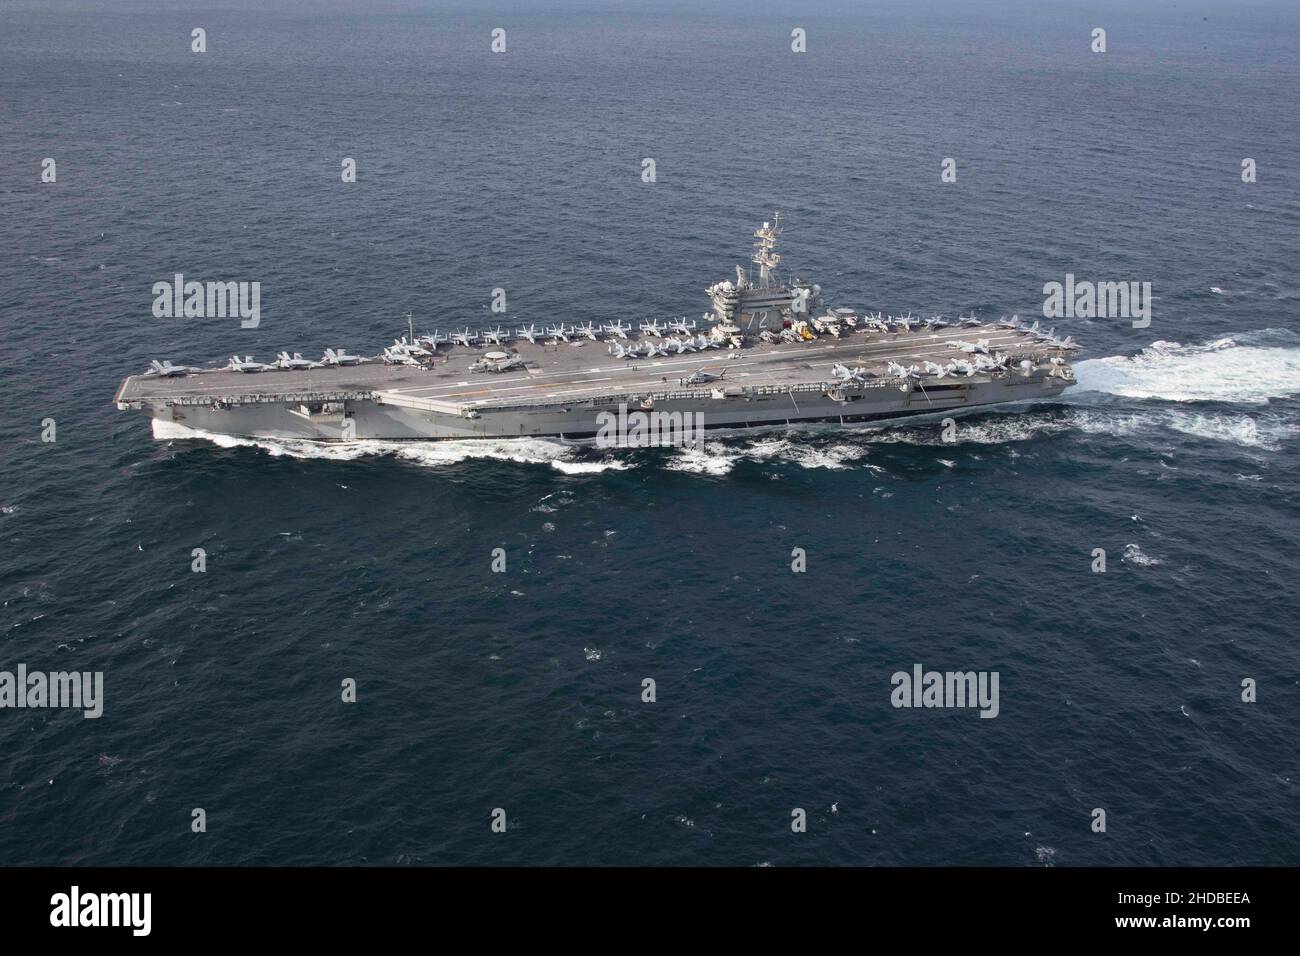 The Nimitz-class aircraft carrier USS Abraham Lincoln (CVN 72) transits the Atlantic Ocean during a strait transit exercise in the Atlantic Ocean on January 30, 2019. Abraham Lincoln is underway conducting Composite Training Unit Exercise (COMPTUEX) with Carrier Strike Group (CSG) 12. The components of CSG 12 embody a “team-of-teams” concept, combining advanced surface, air and systems assets to create and sustain operational capability. This enables them to prepare for and conduct global operations, have effective and lasting command and control, and demonstrate dedication and commitment to b Stock Photo